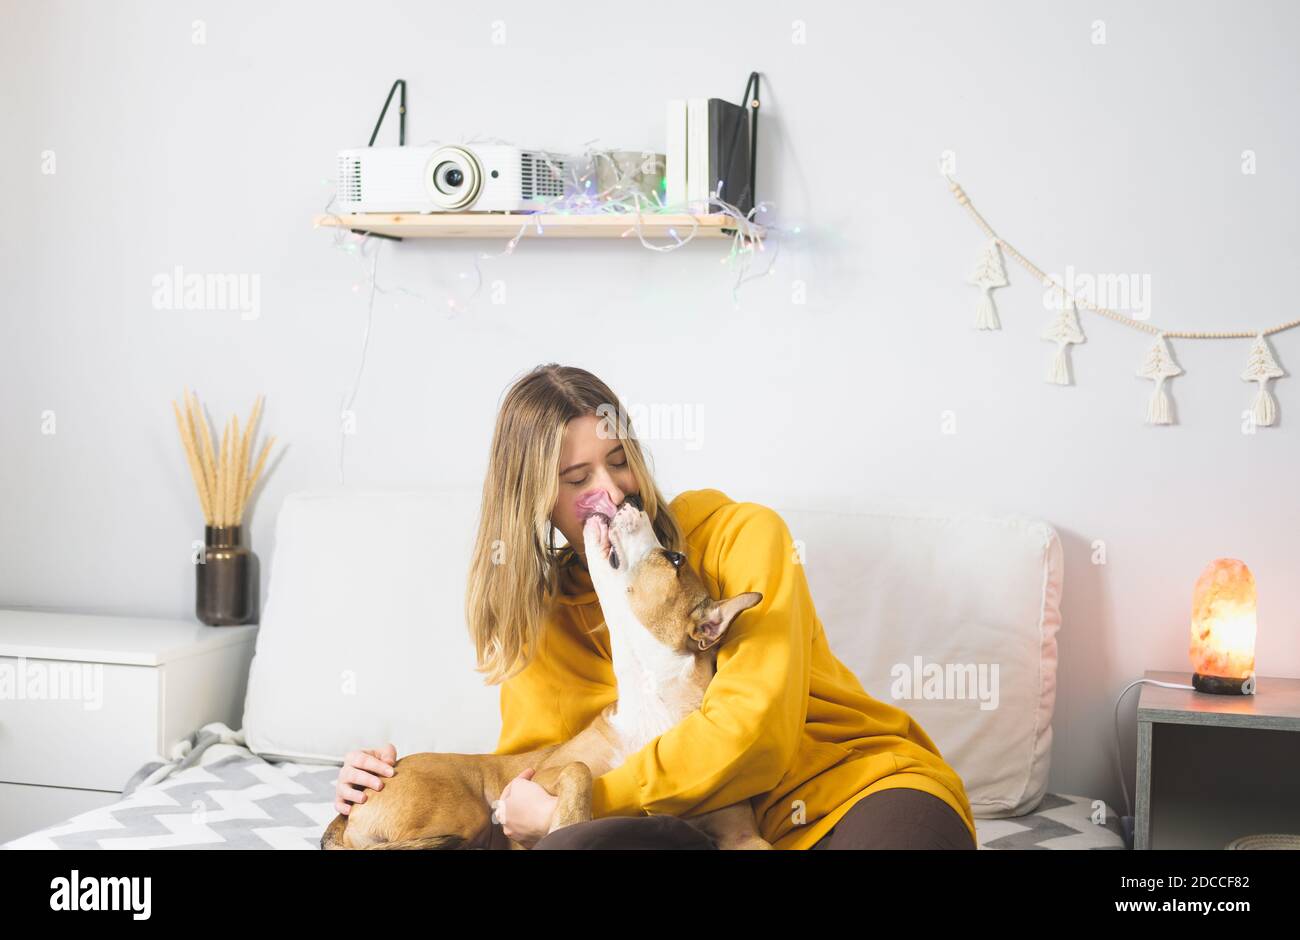 Happy dog licks woman's face, indoor bedroom scene. Joy from pets at home or during lockdown or self isolation, cold winter season Stock Photo